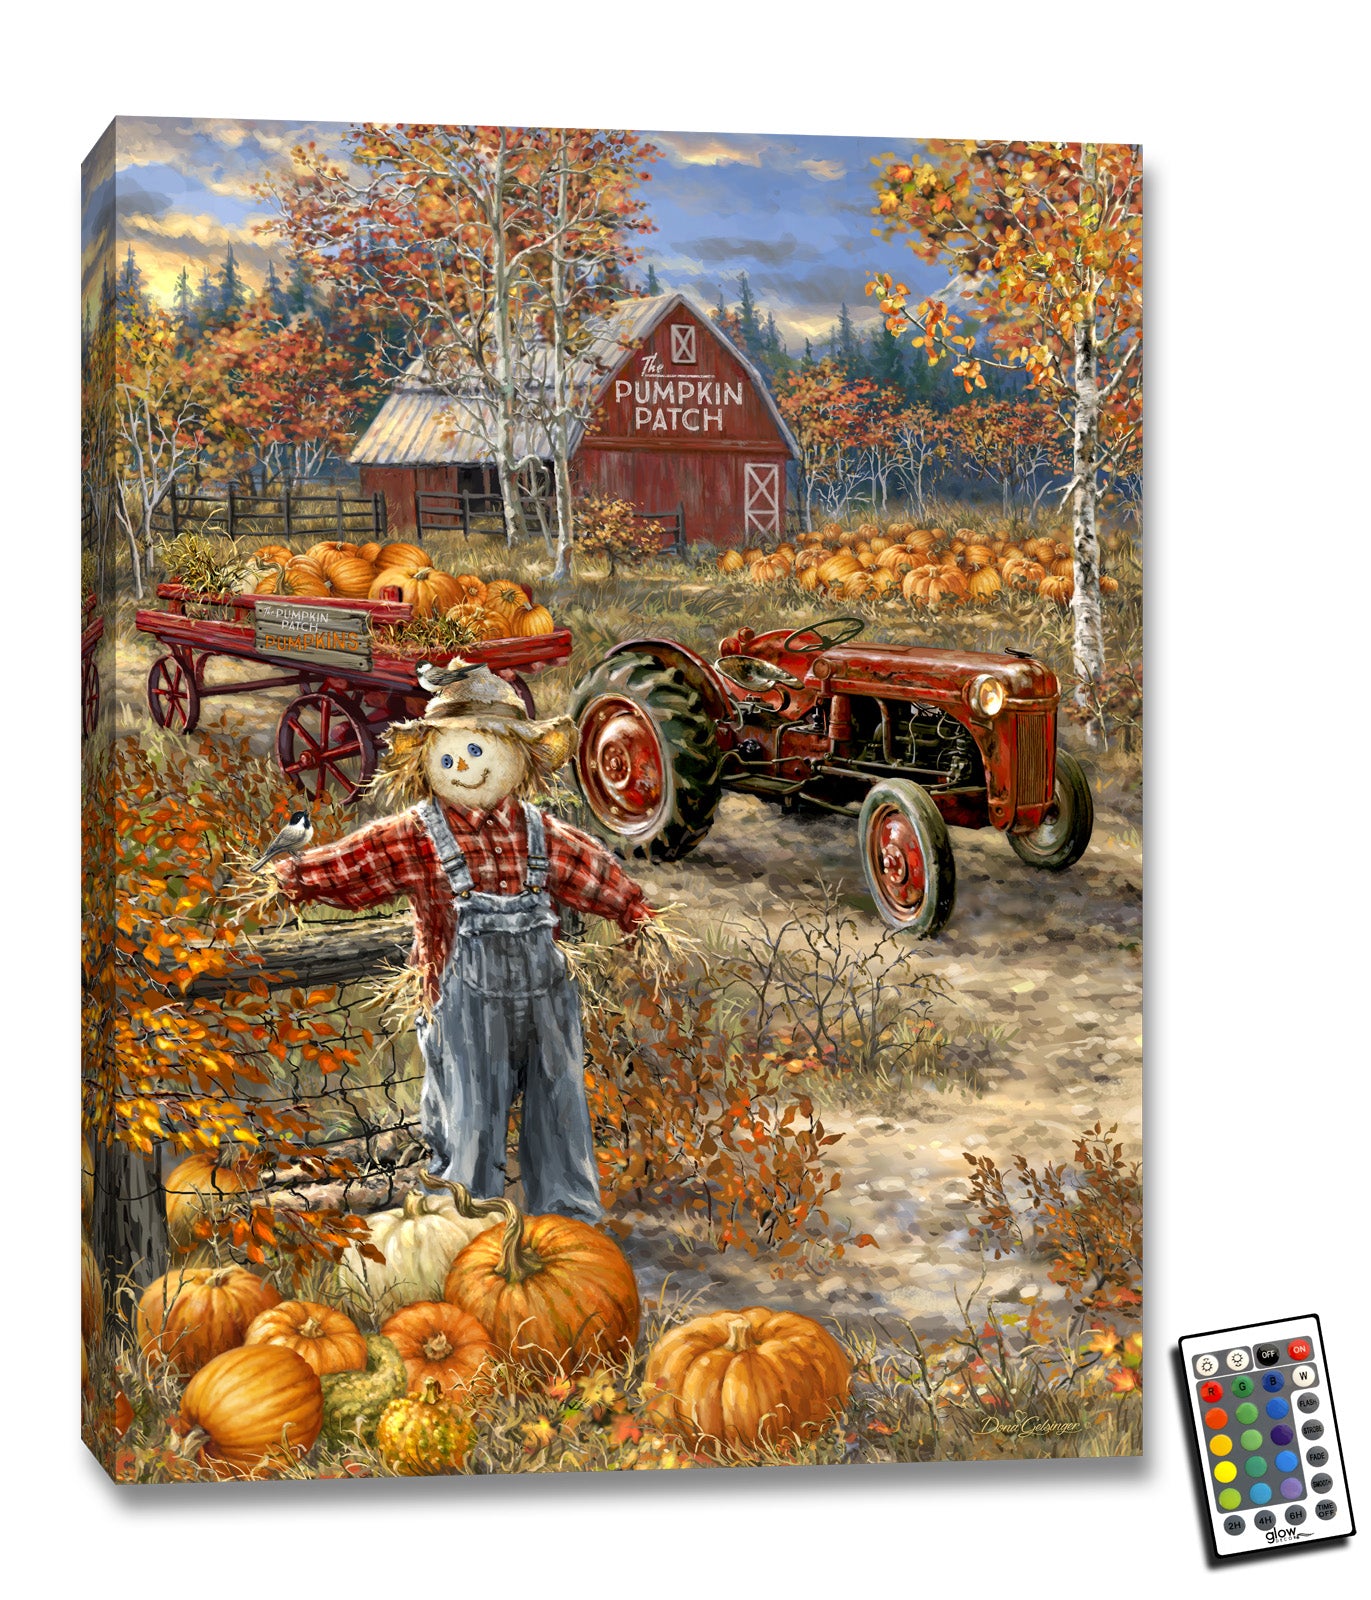 As you gaze upon this picturesque scene, you'll notice a friendly scarecrow standing guard by the fence, watching over the pumpkin patch. Behind him, a tractor with a trailer full of pumpkins sits, ready to transport them to their new homes. And in the distance, a majestic red barn stands tall, a symbol of the hard work and dedication that goes into growing these gorgeous pumpkins.